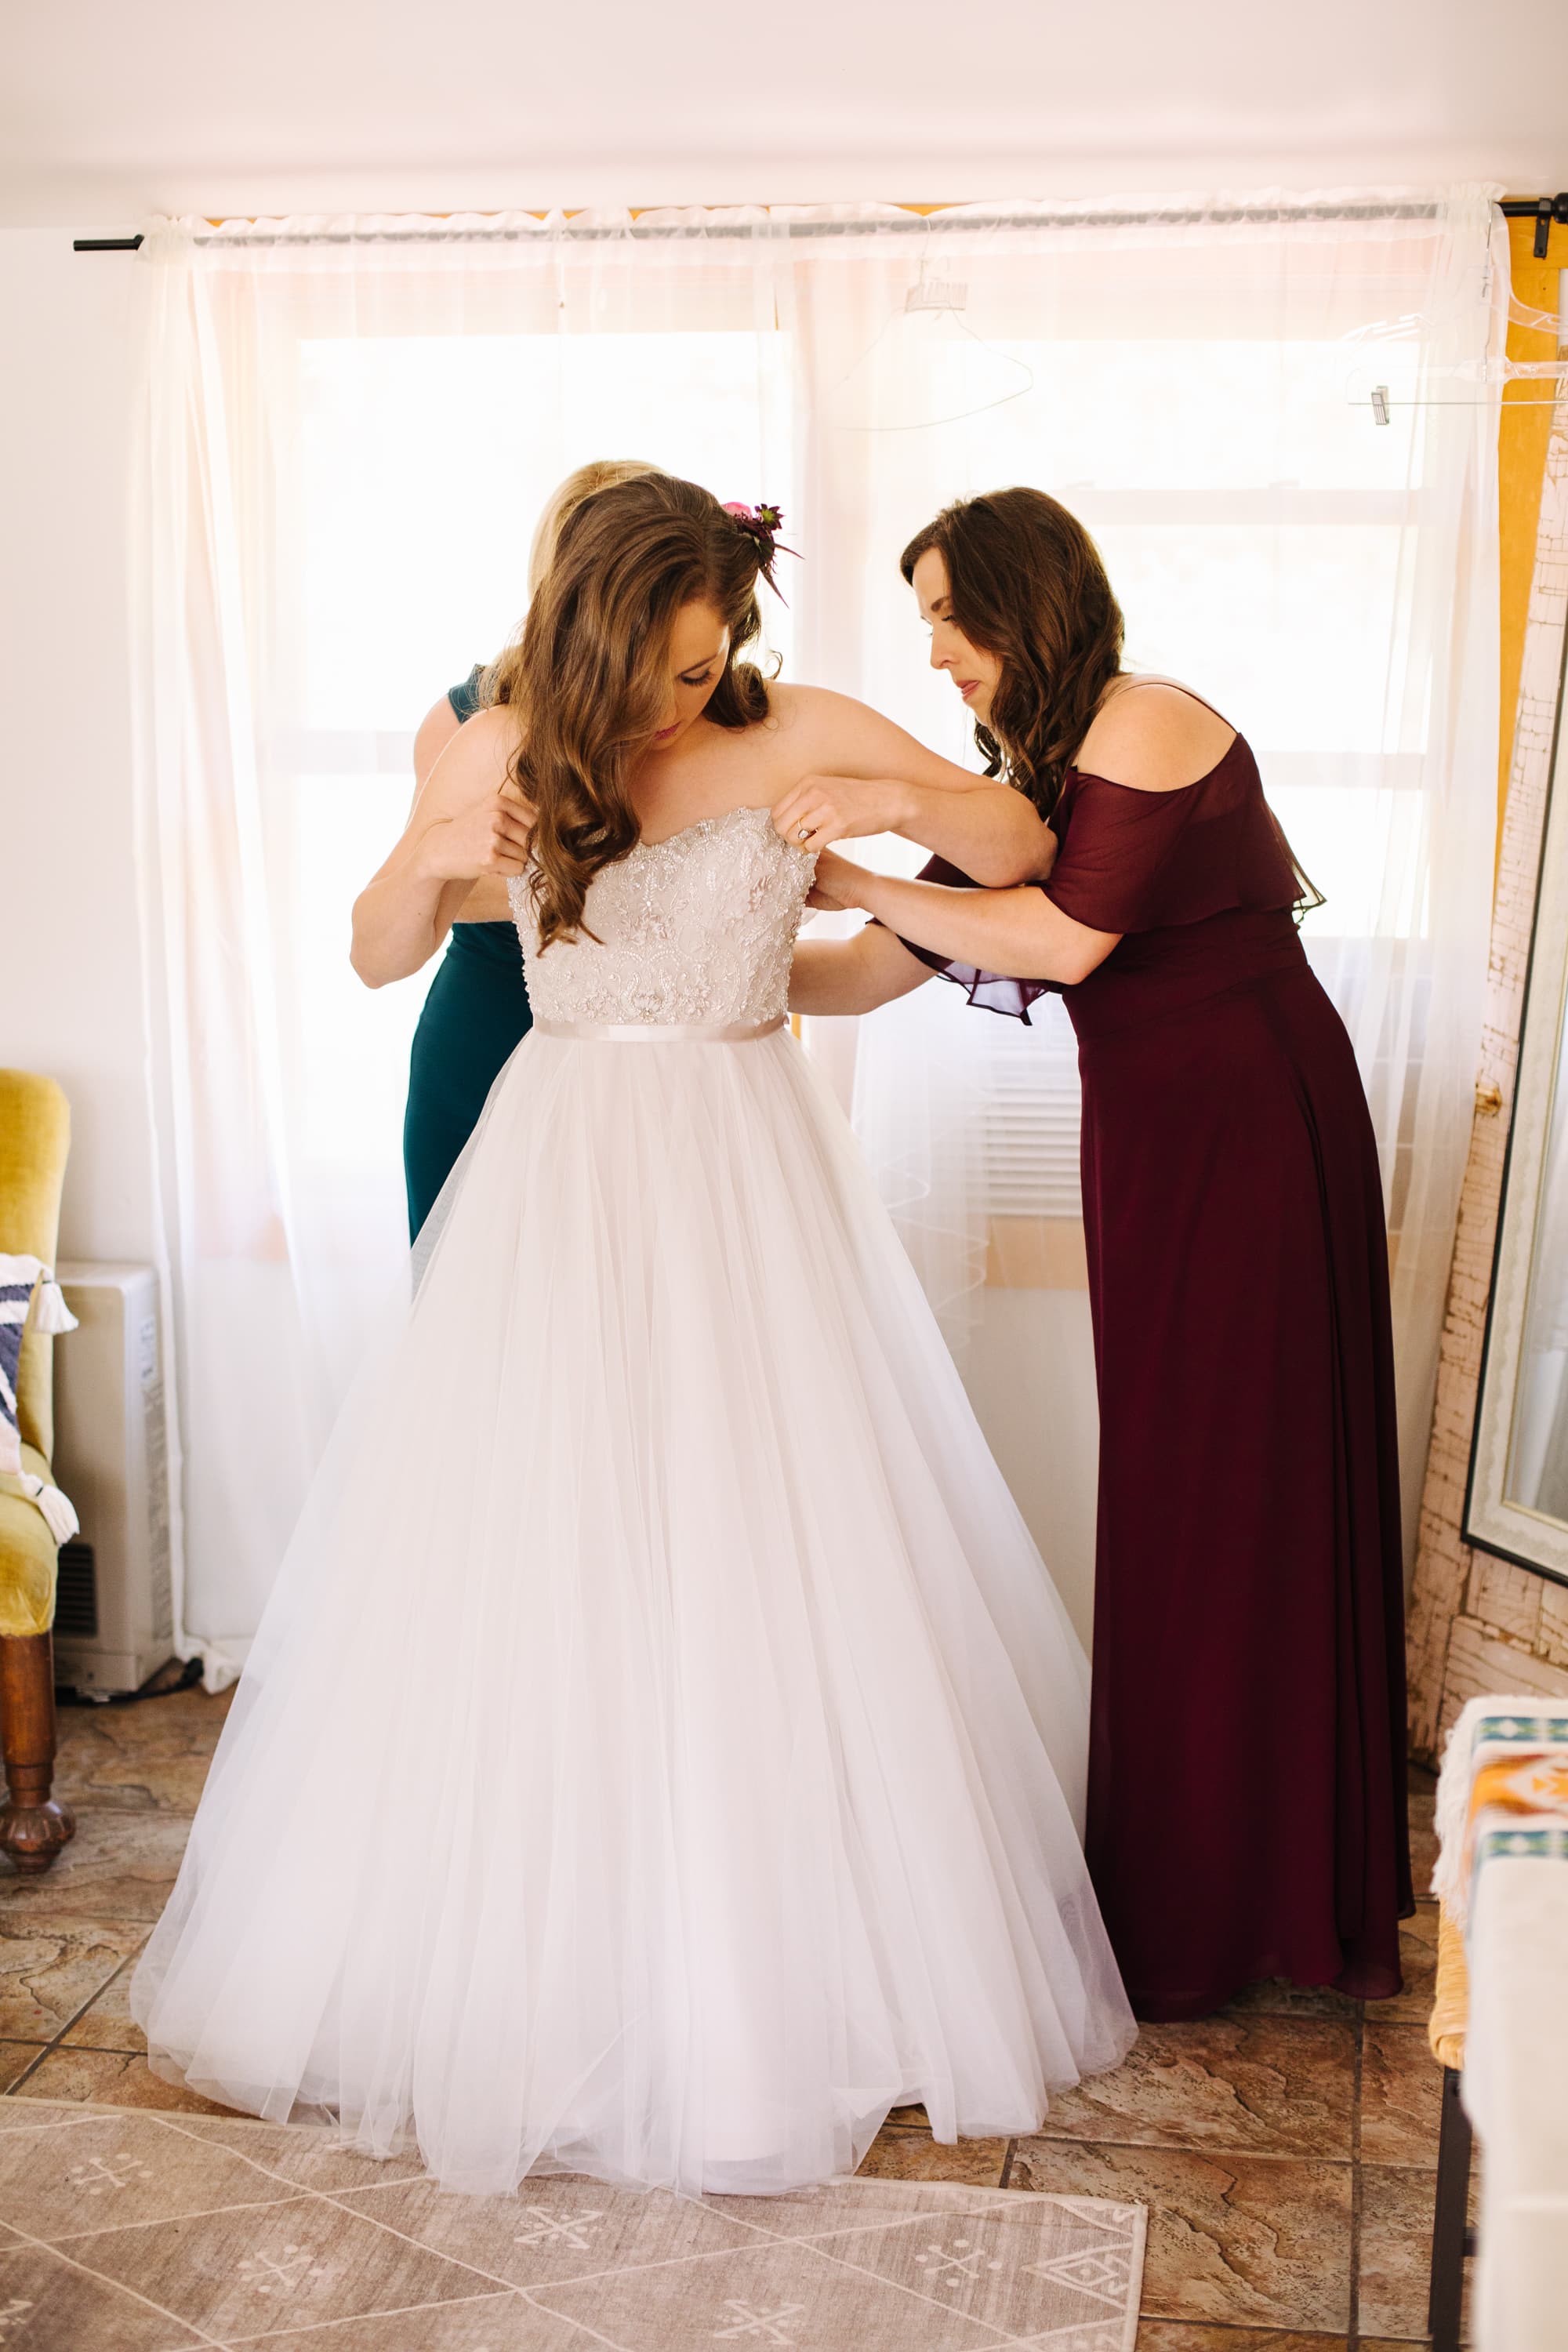 mom and sister with bride, mom with bride, getting ready bride, wedding getting ready, bride putting on dress, burgundy maid of honor dress, tule skirt wedding dress